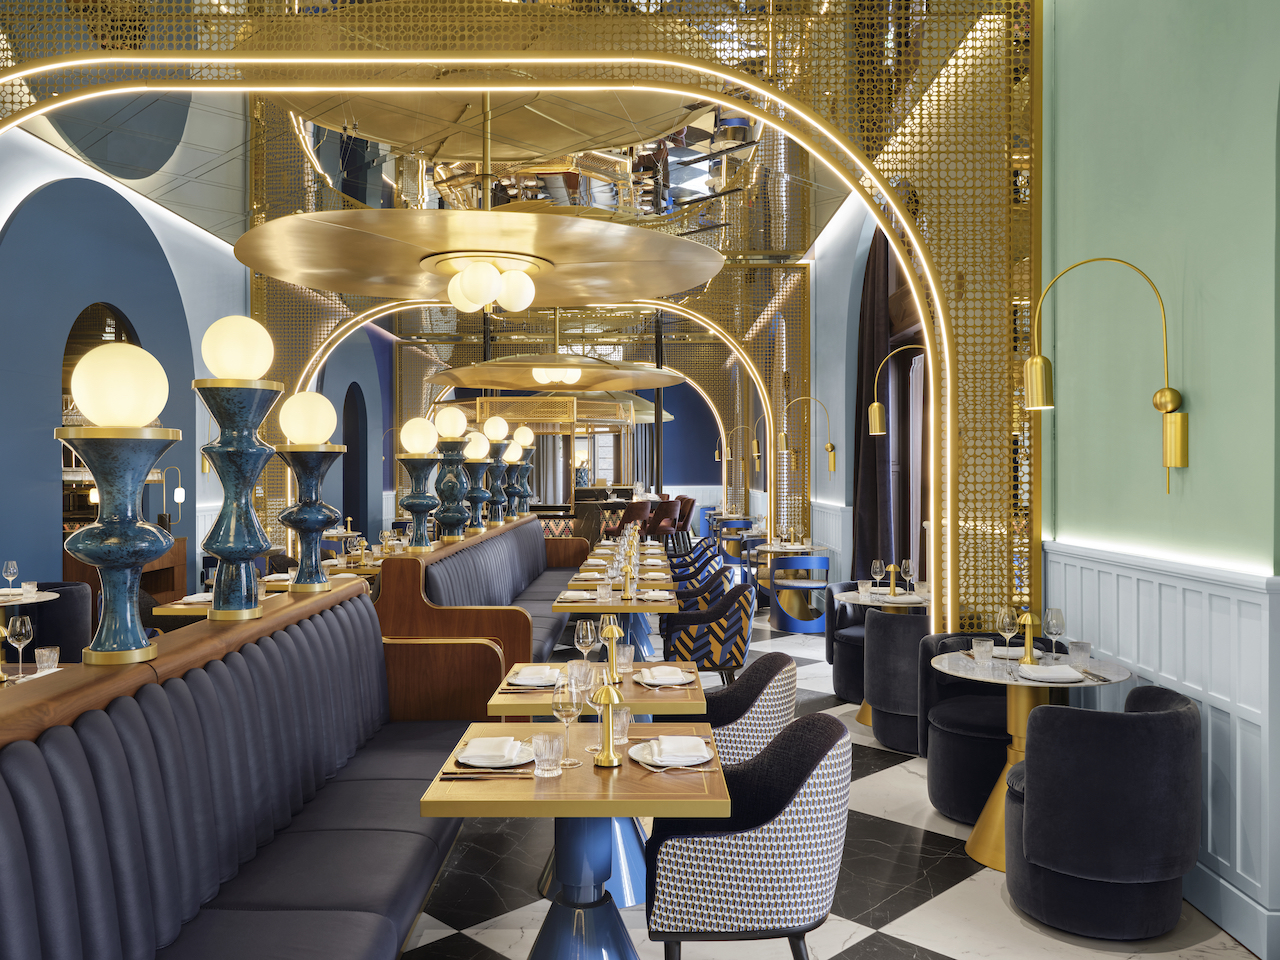 The new W Budapest combines visionary design, eclectic gastronomy and a socially driven spirit drawn from the cosmopolitan capital.  